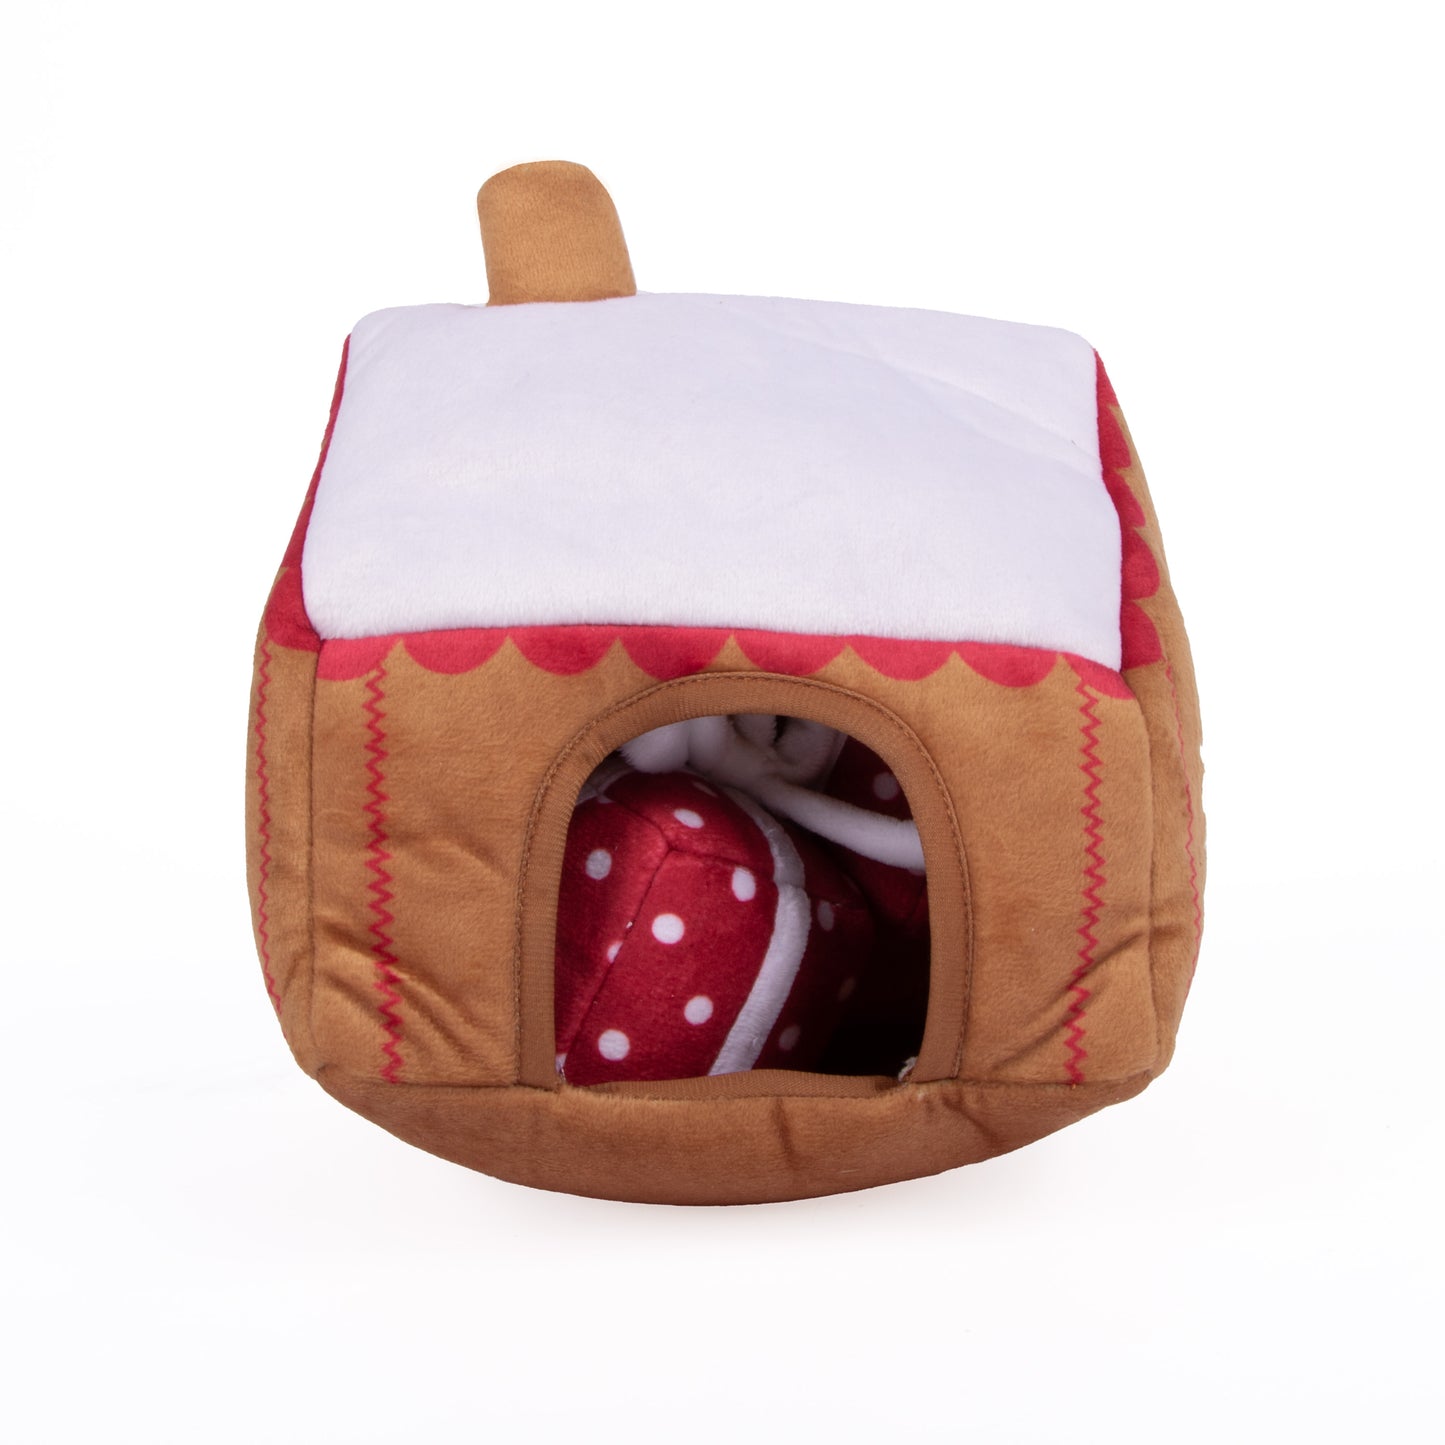 My Tennessee Mountain Home Holiday Plush Hide & Seek Puzzle Toy